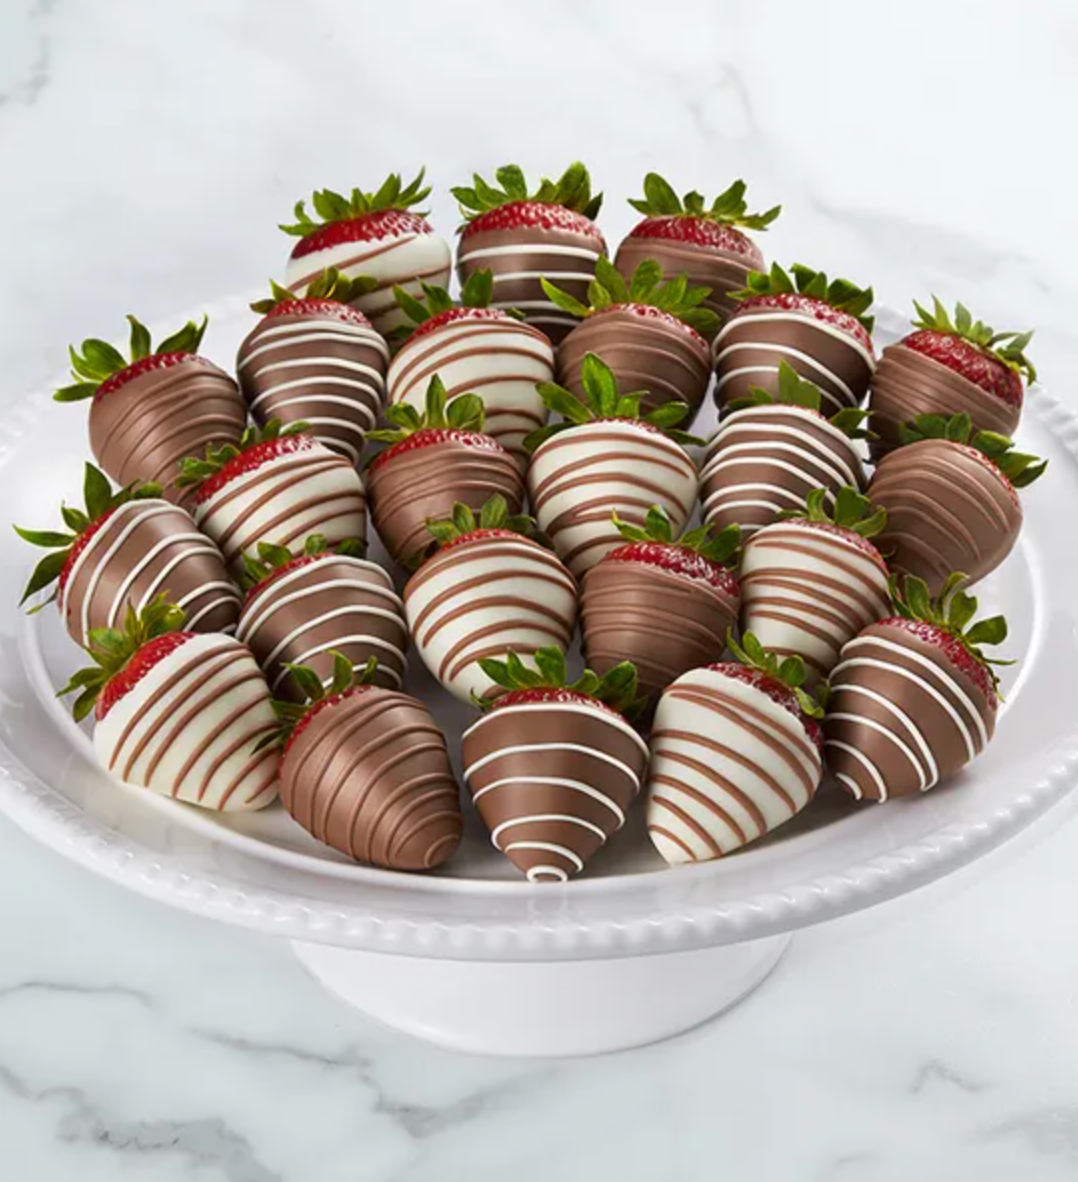 Gourmet Drizzled Strawberries